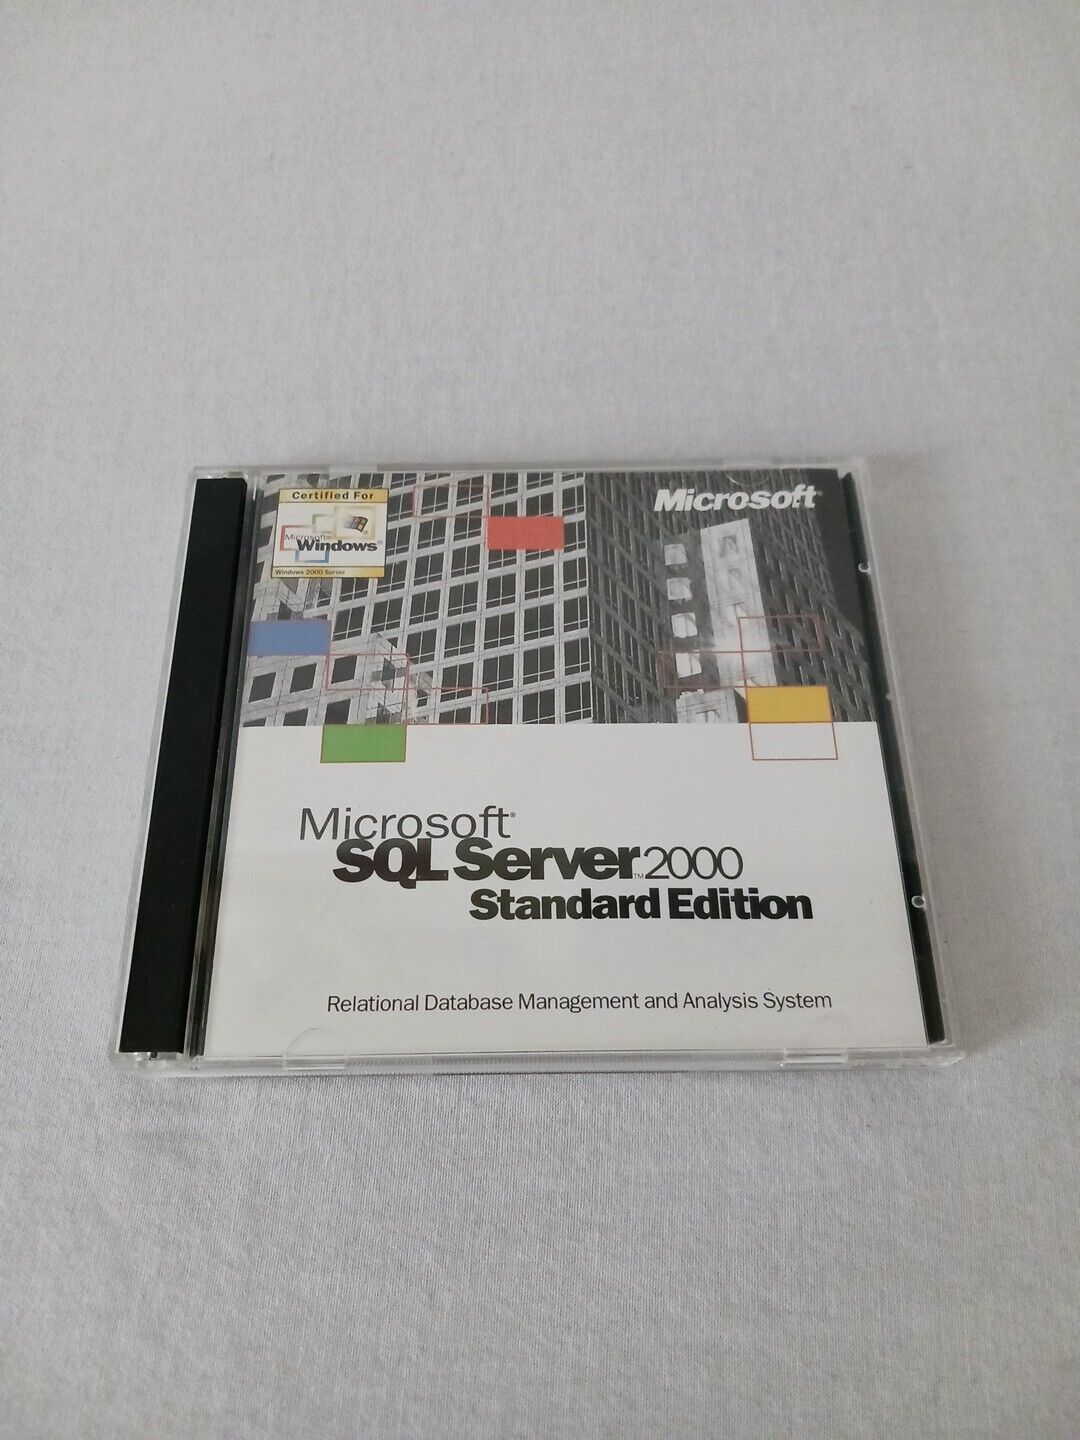 Microsoft SQL Server 2000 Standard Edition with Product Key - EUC - SEE PICTURES